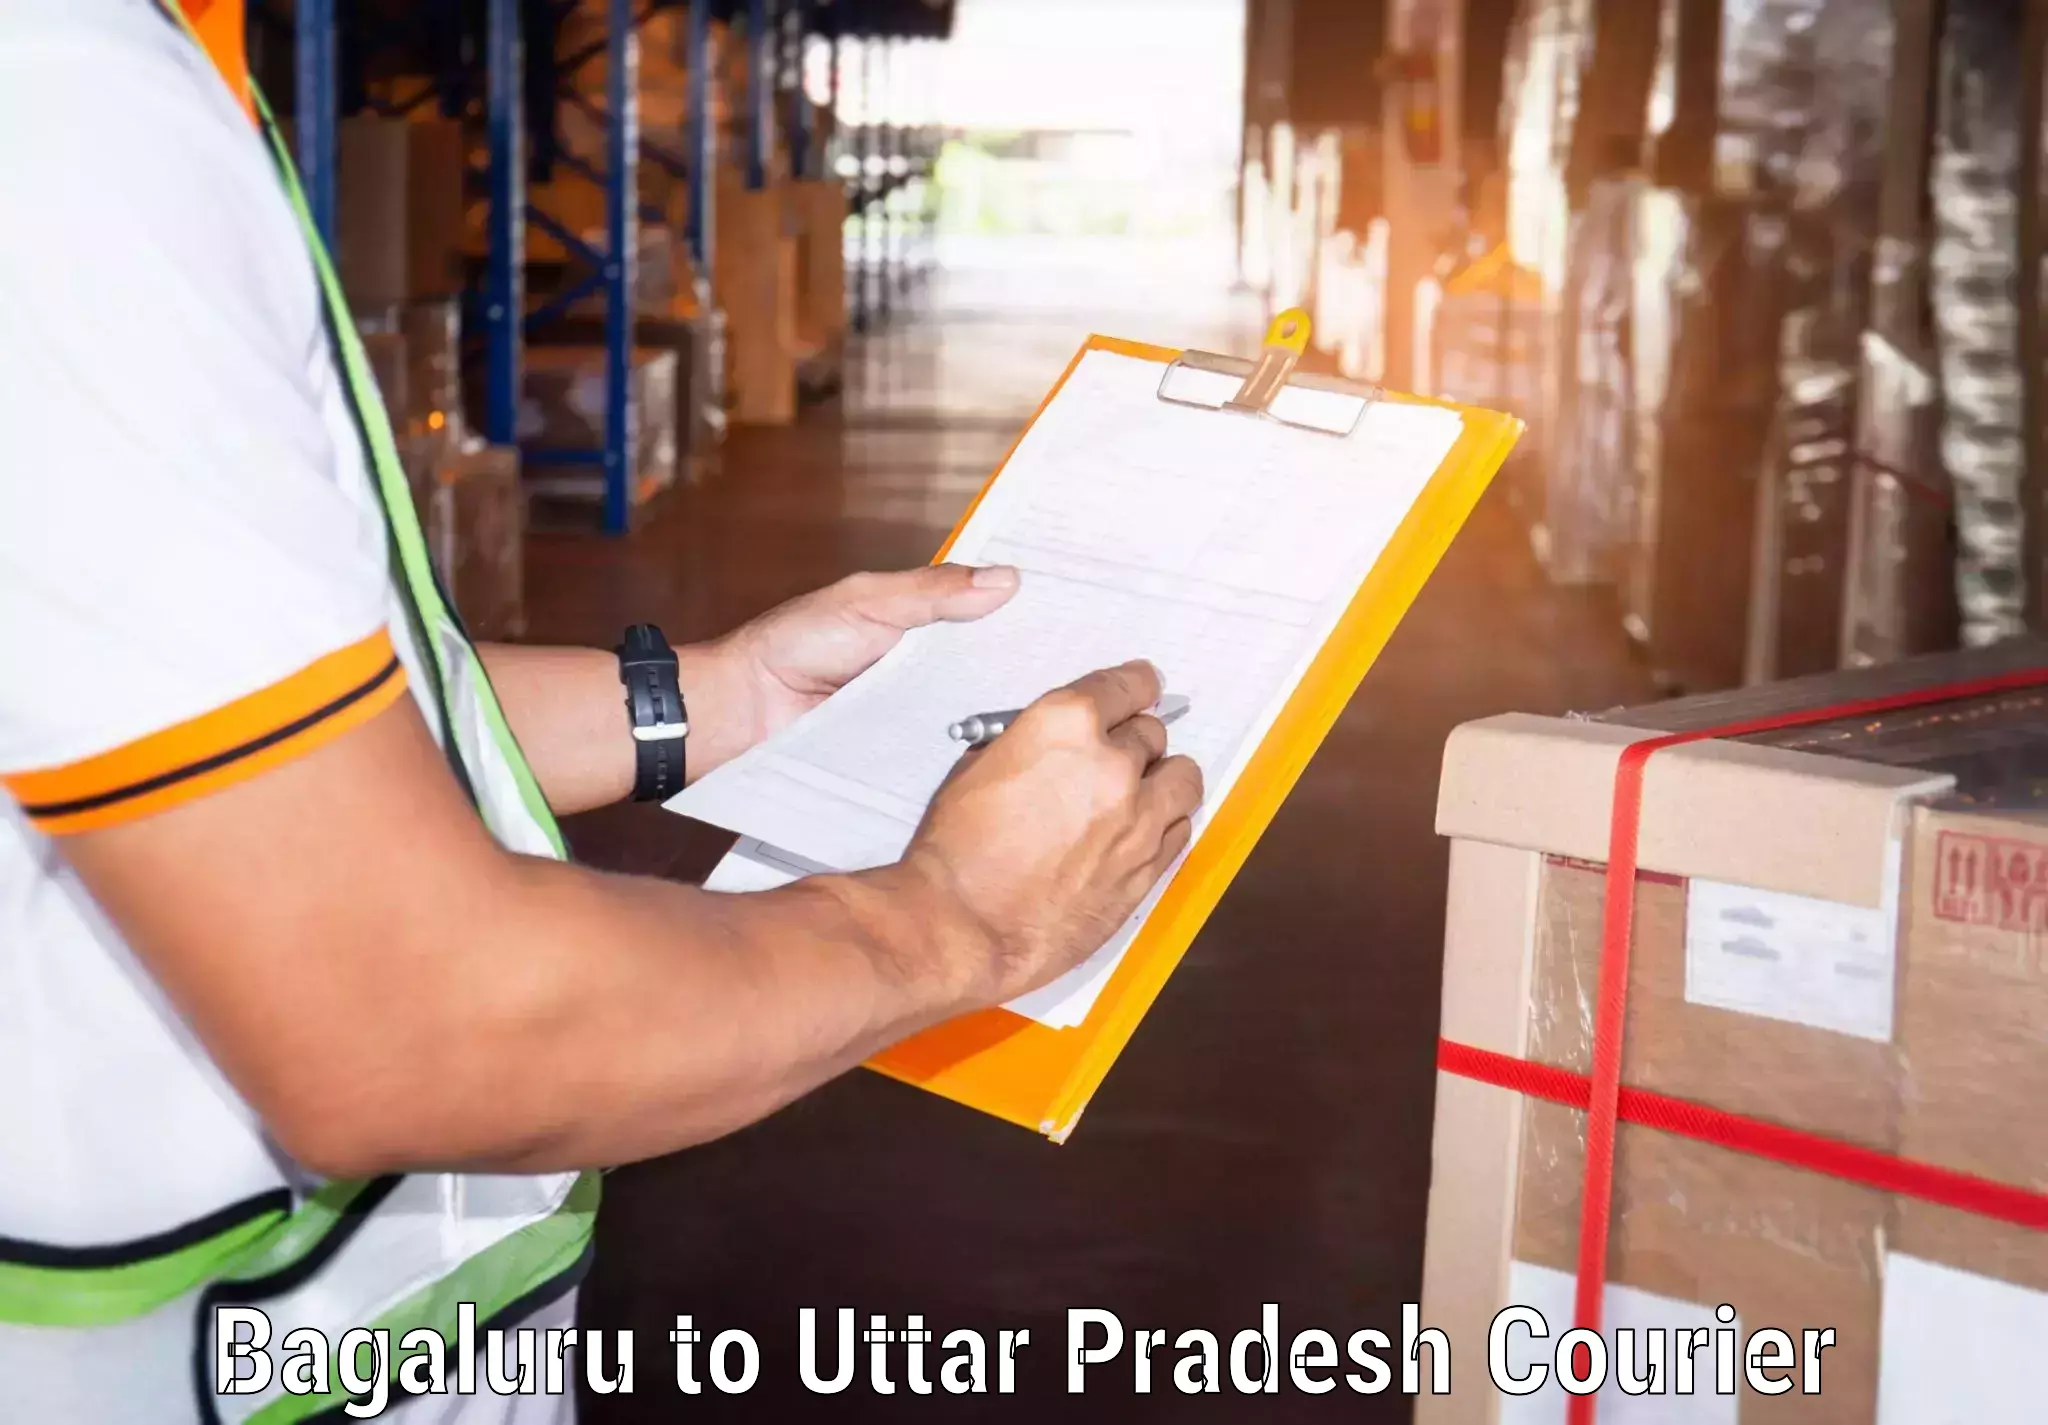 State-of-the-art courier technology Bagaluru to Lalitpur